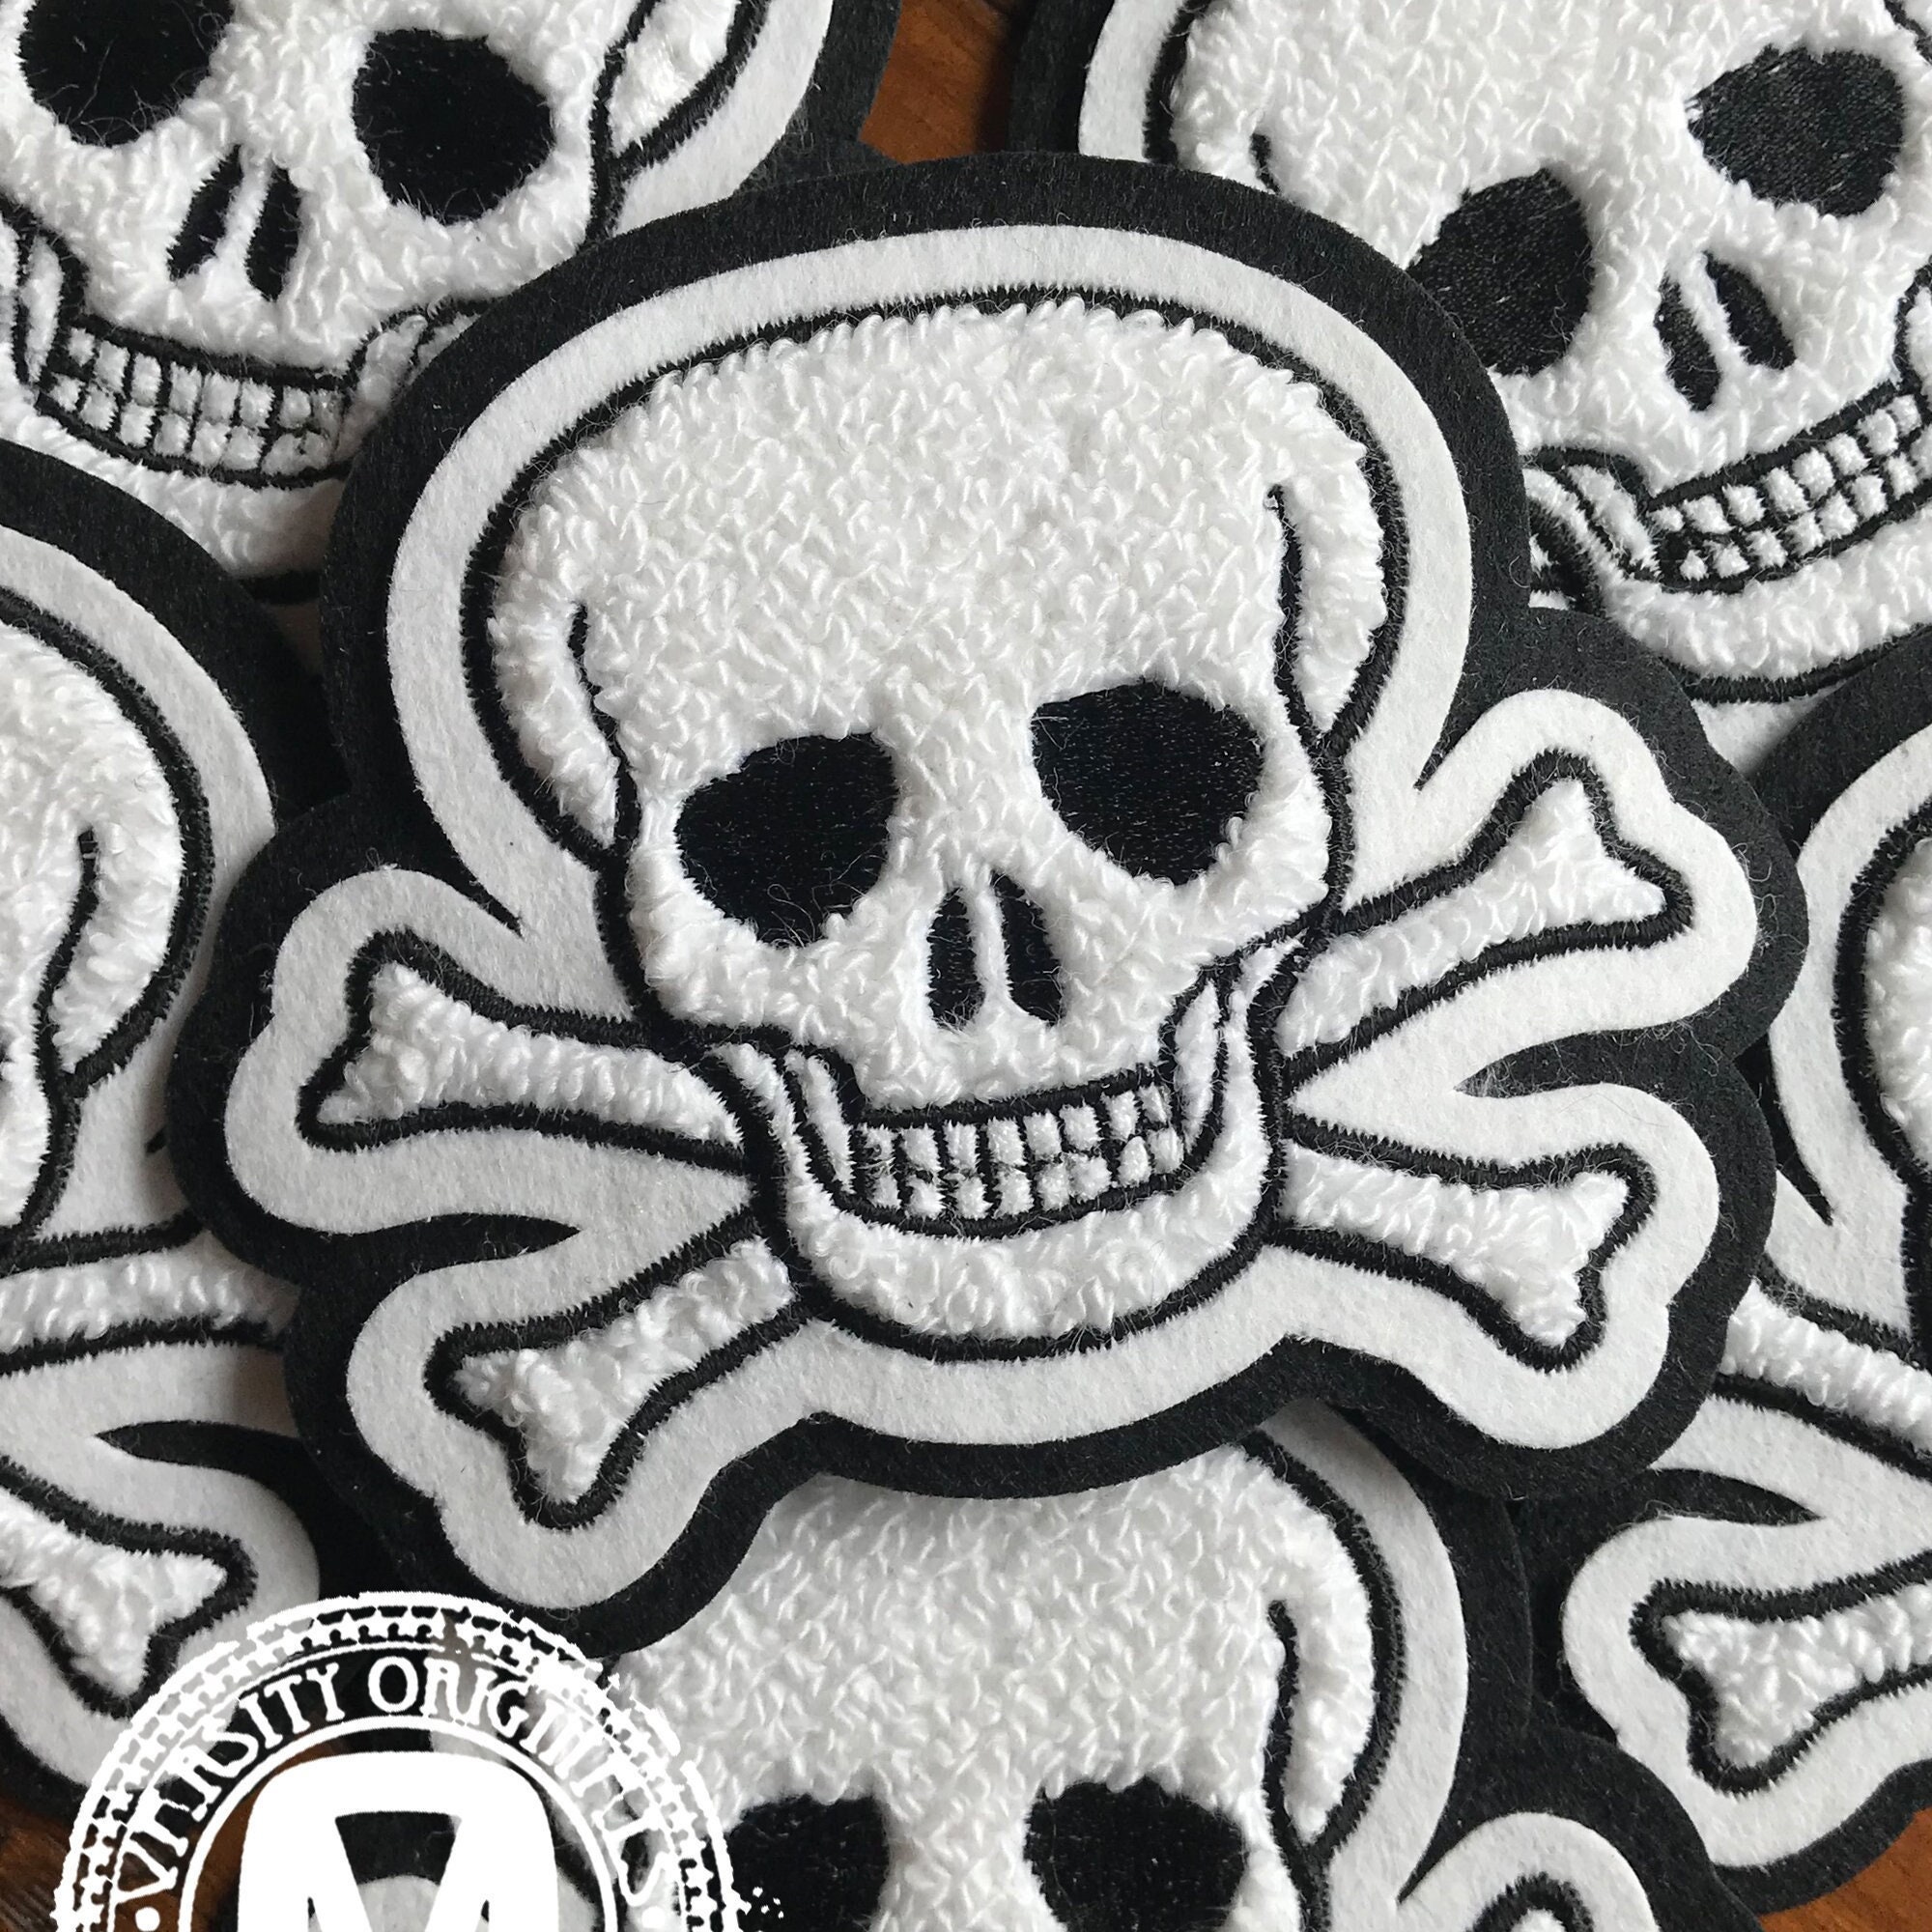 Skull and Crossbones Patch 